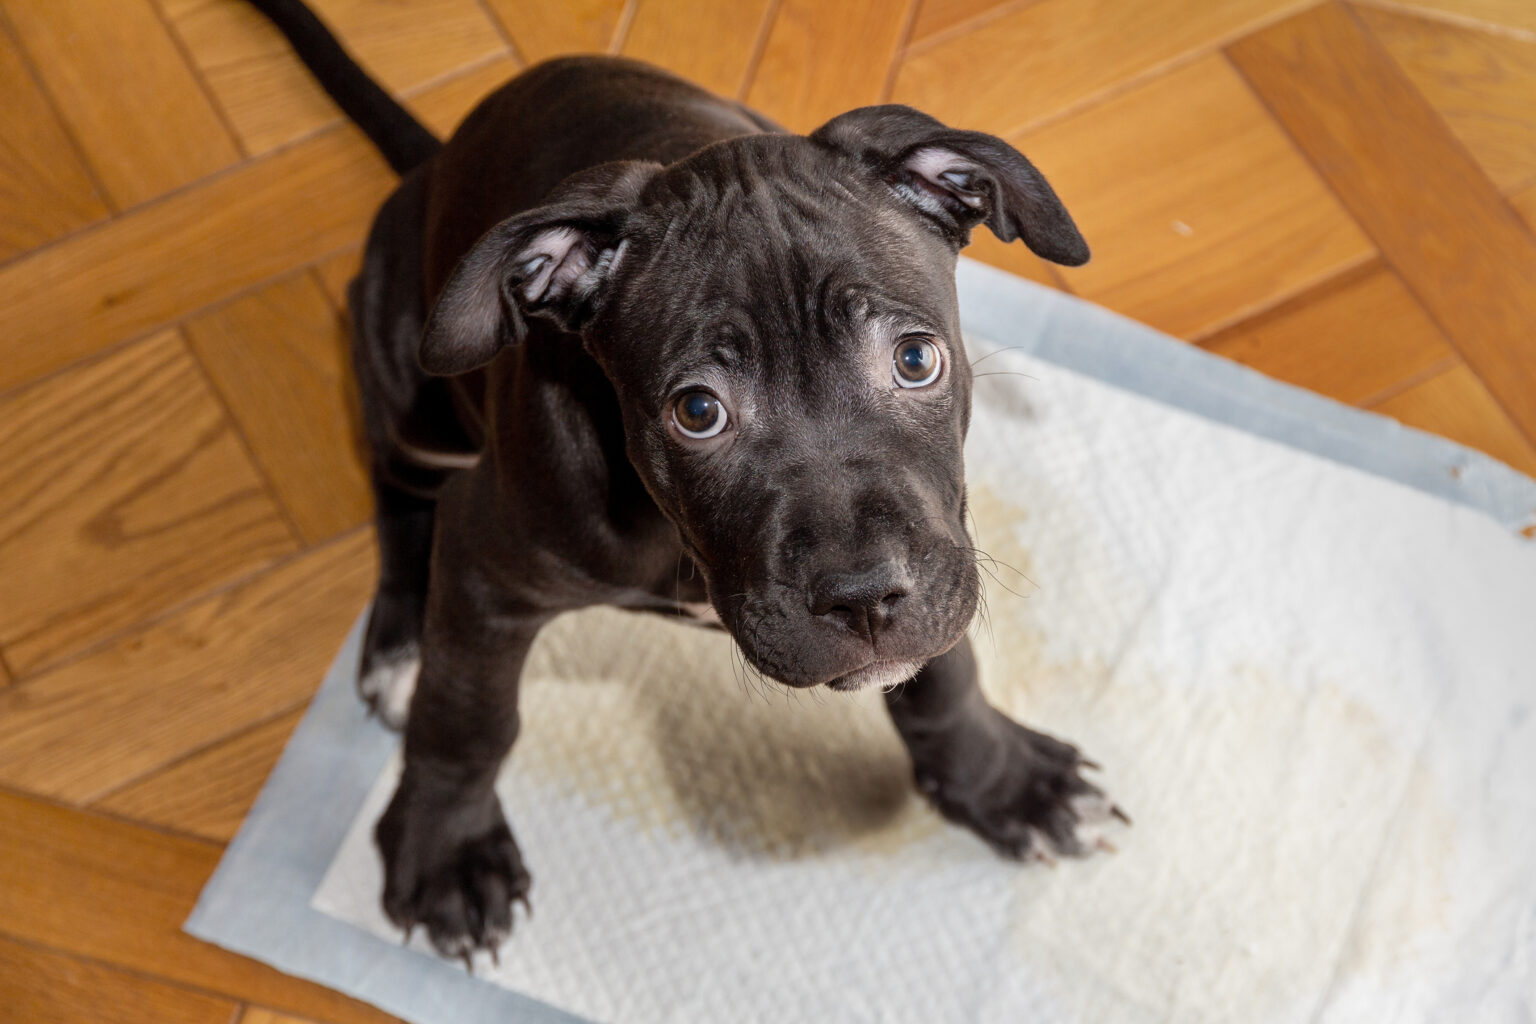 American Pit Bull Terrier puppy on an absorbent diaper. Toilet training